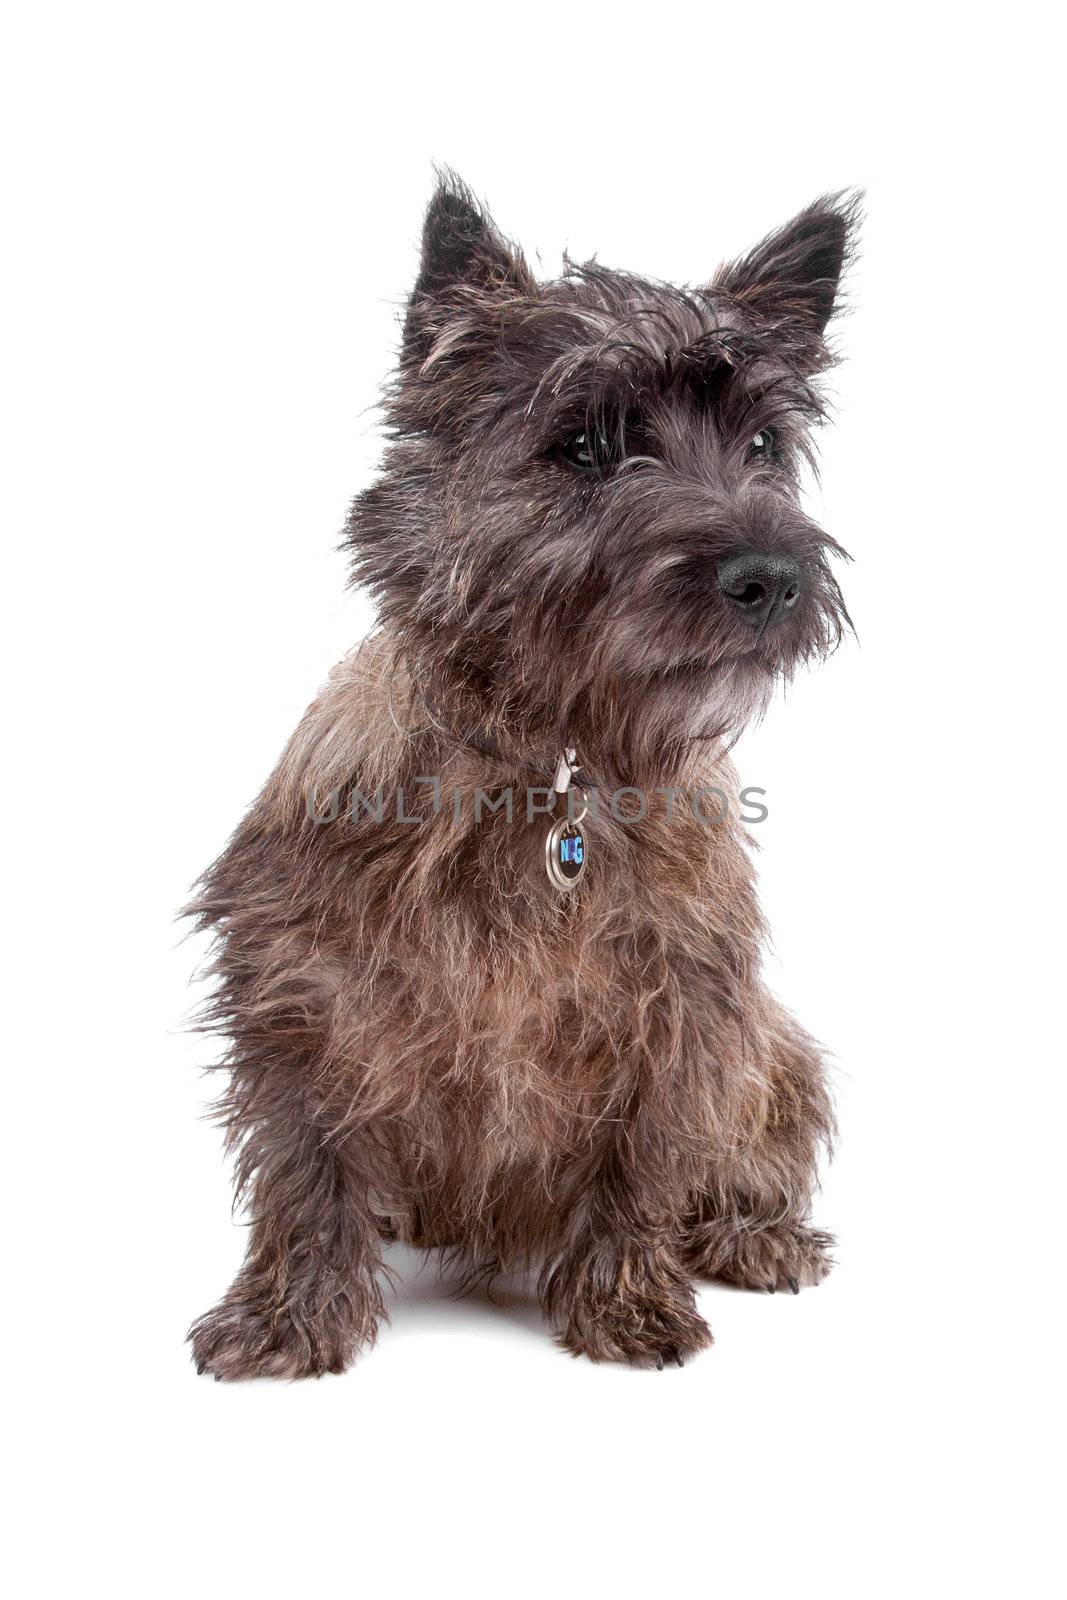 Cute Cairn terrier dog sitting, isolated on a white background